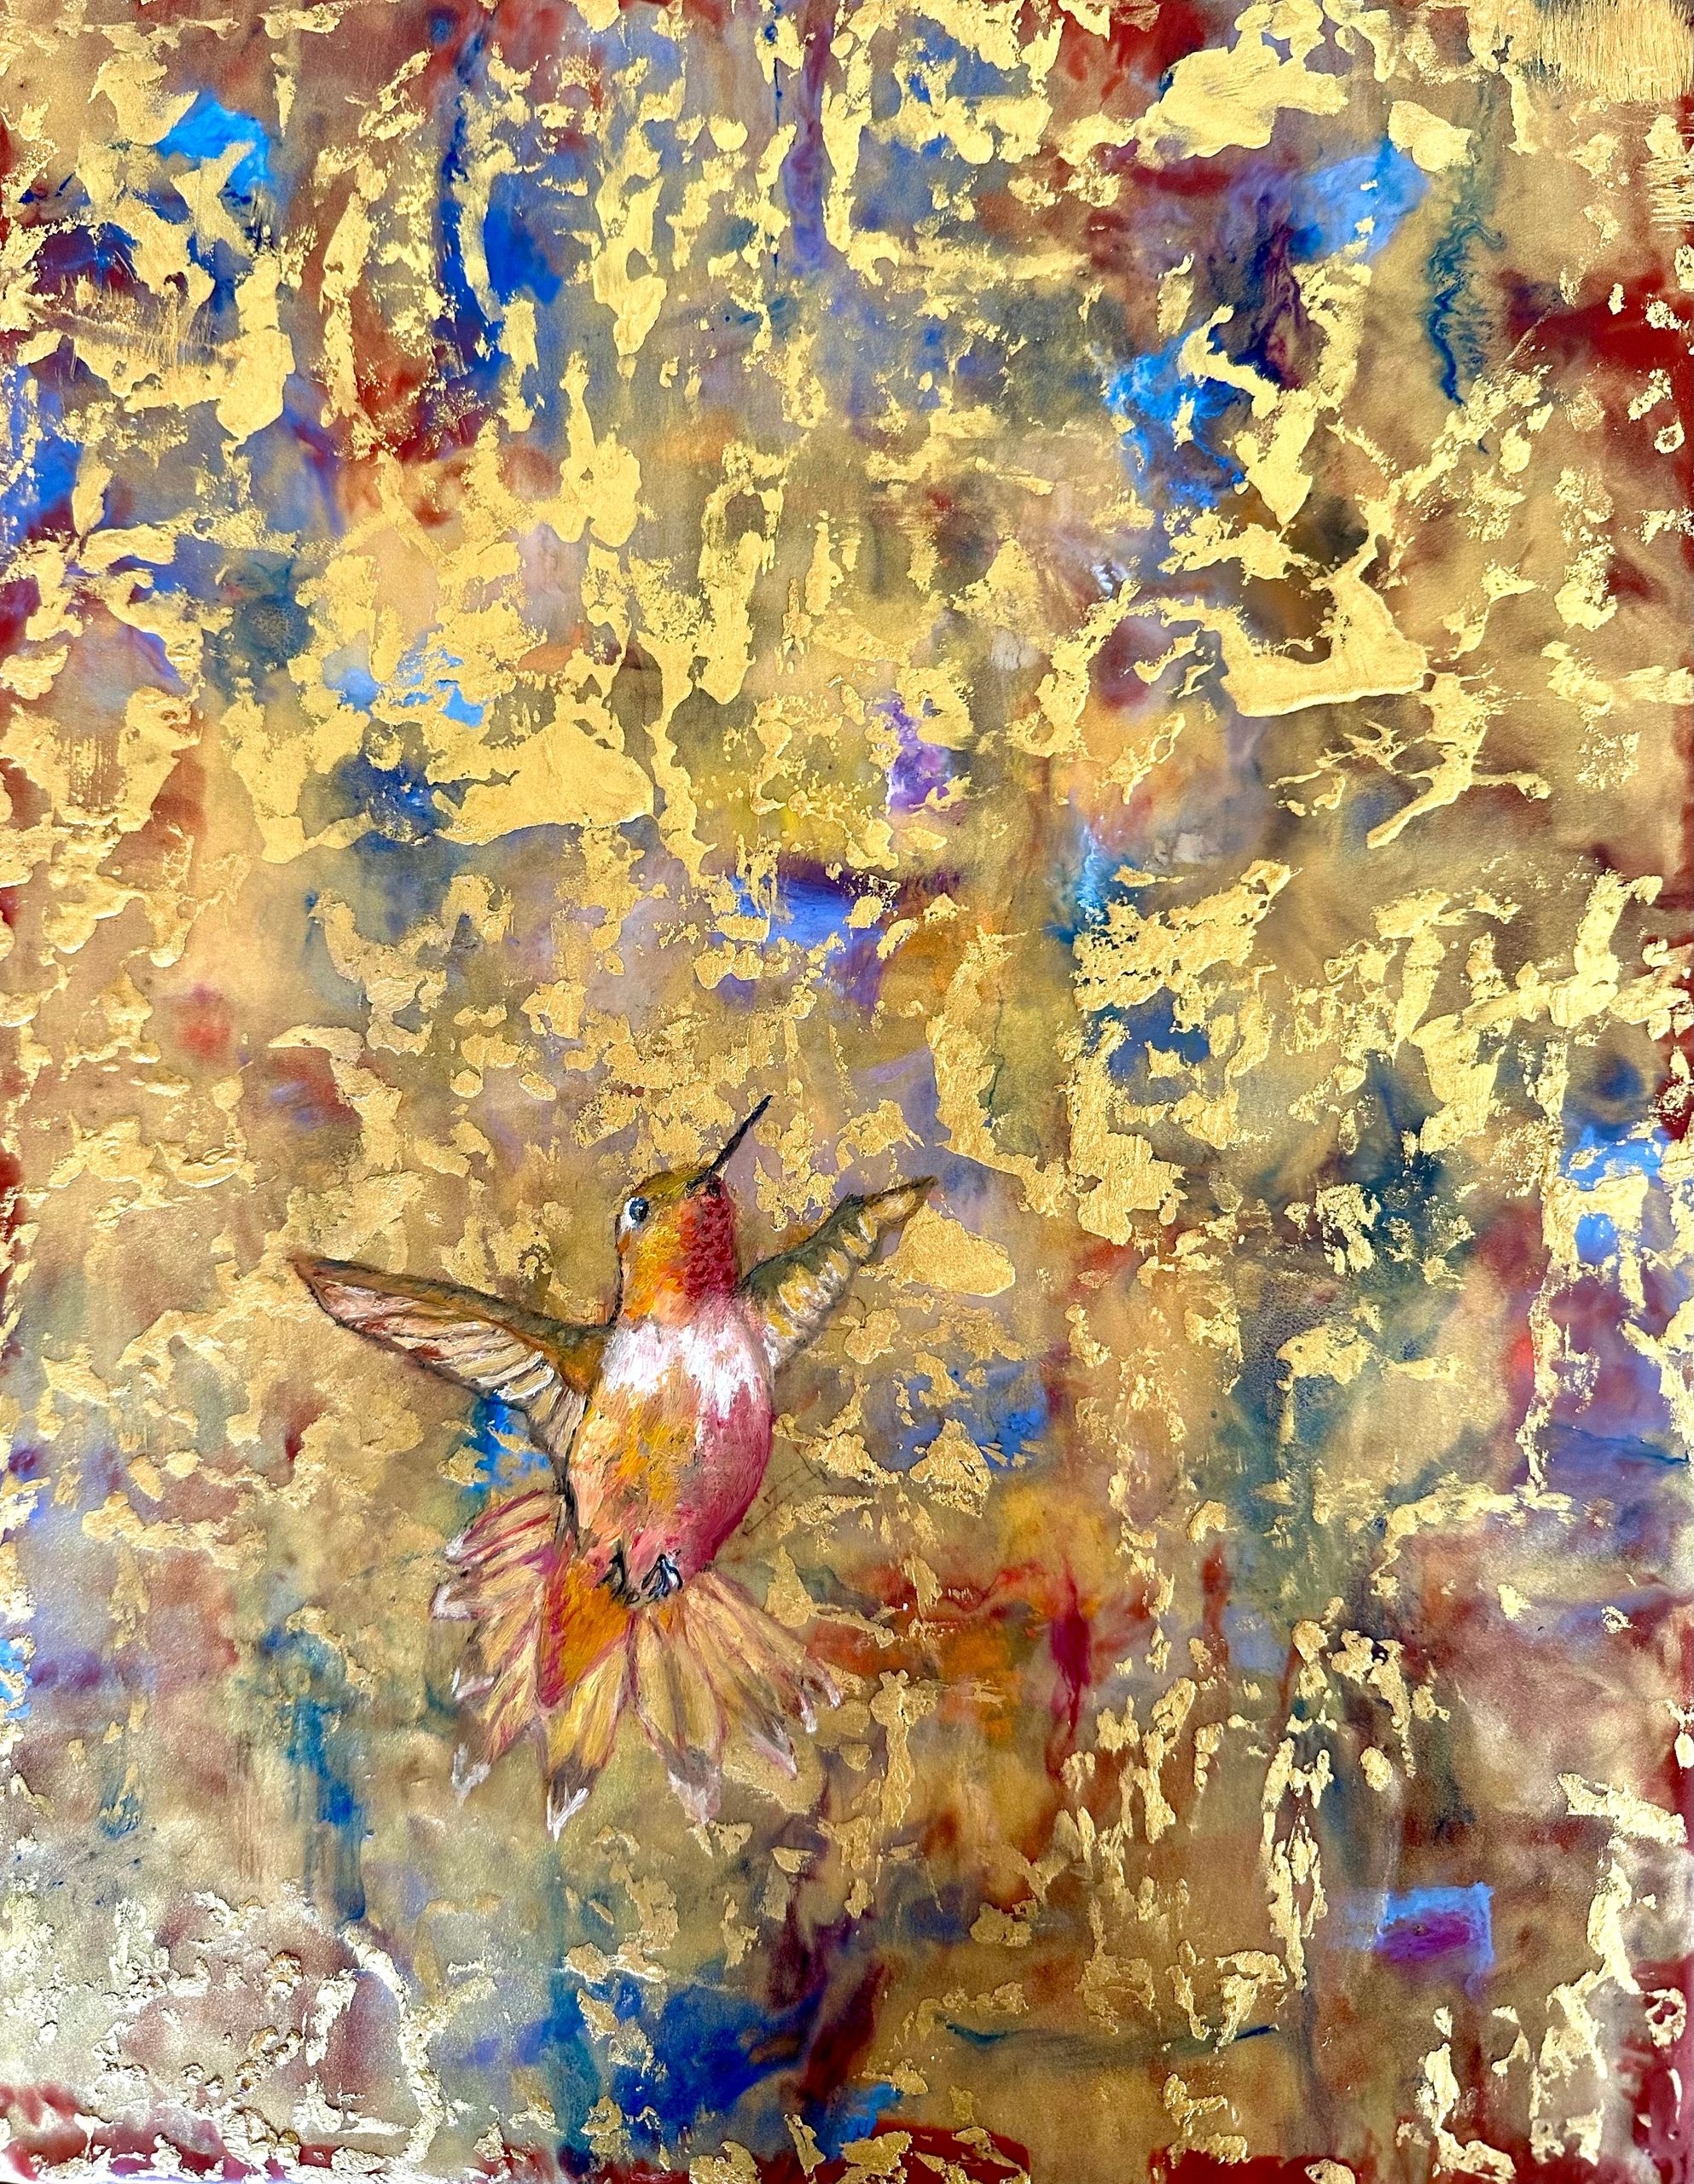 “Flight of the Hummingbird”
Encaustic with gold leafing overlay on cradled birch board.
